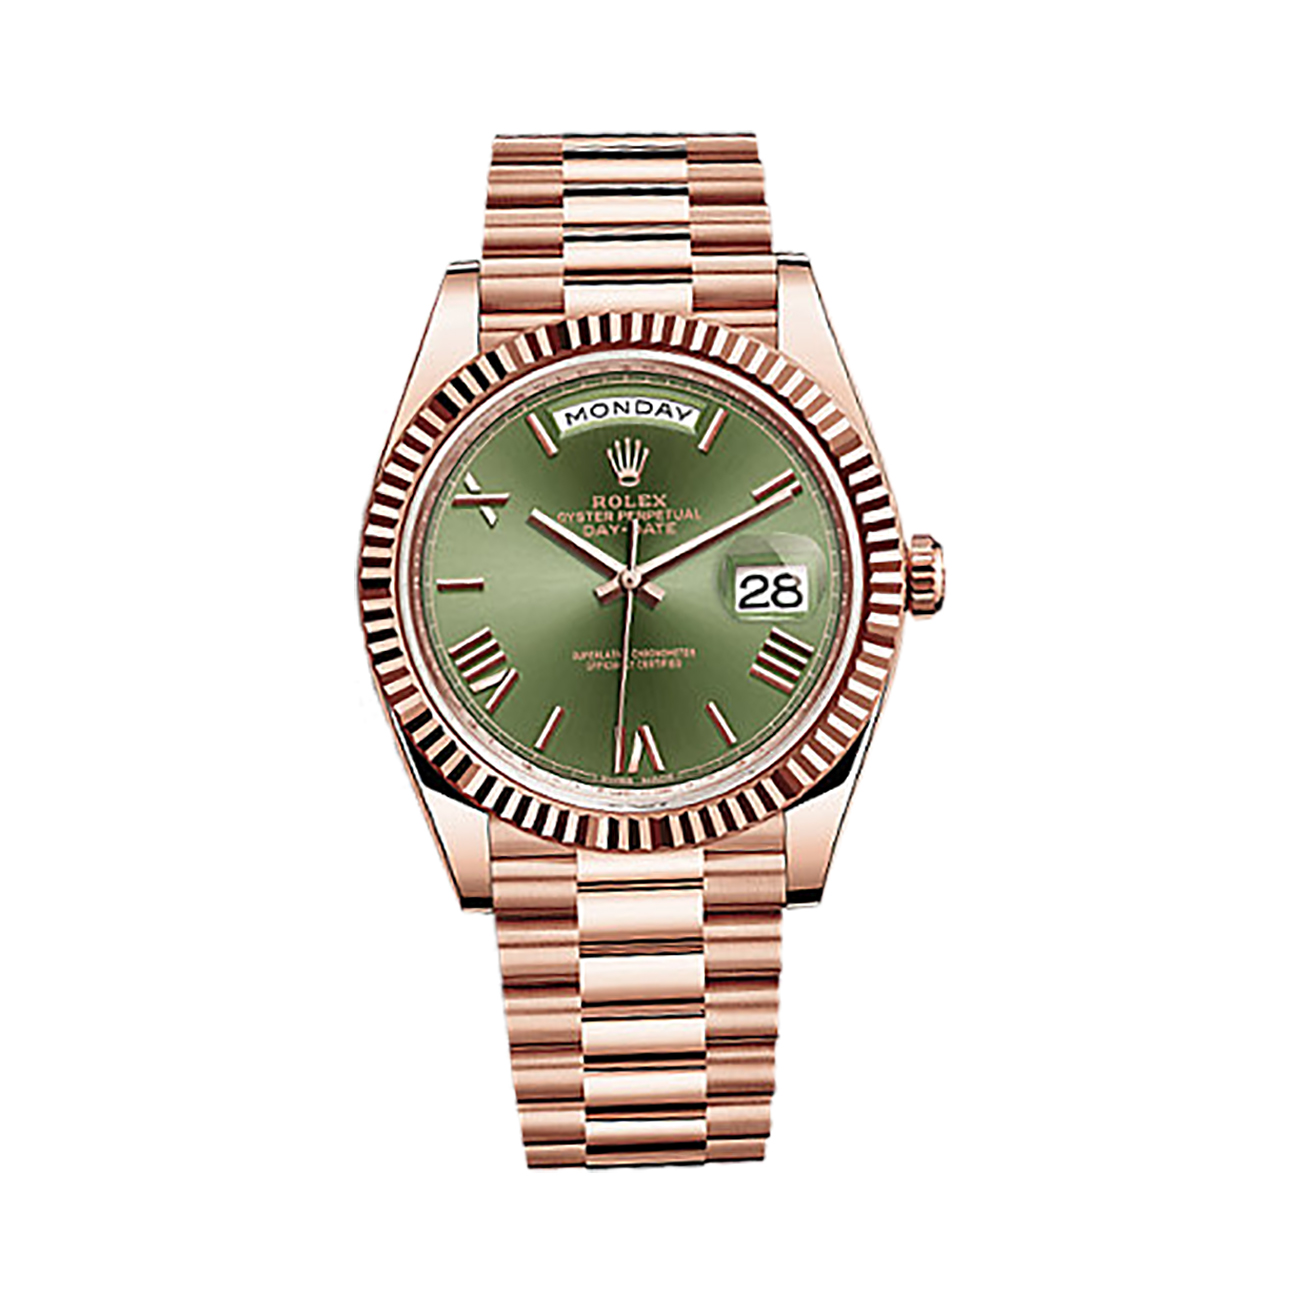 Day-Date 40 228235 Rose Gold Watch (Olive Green)